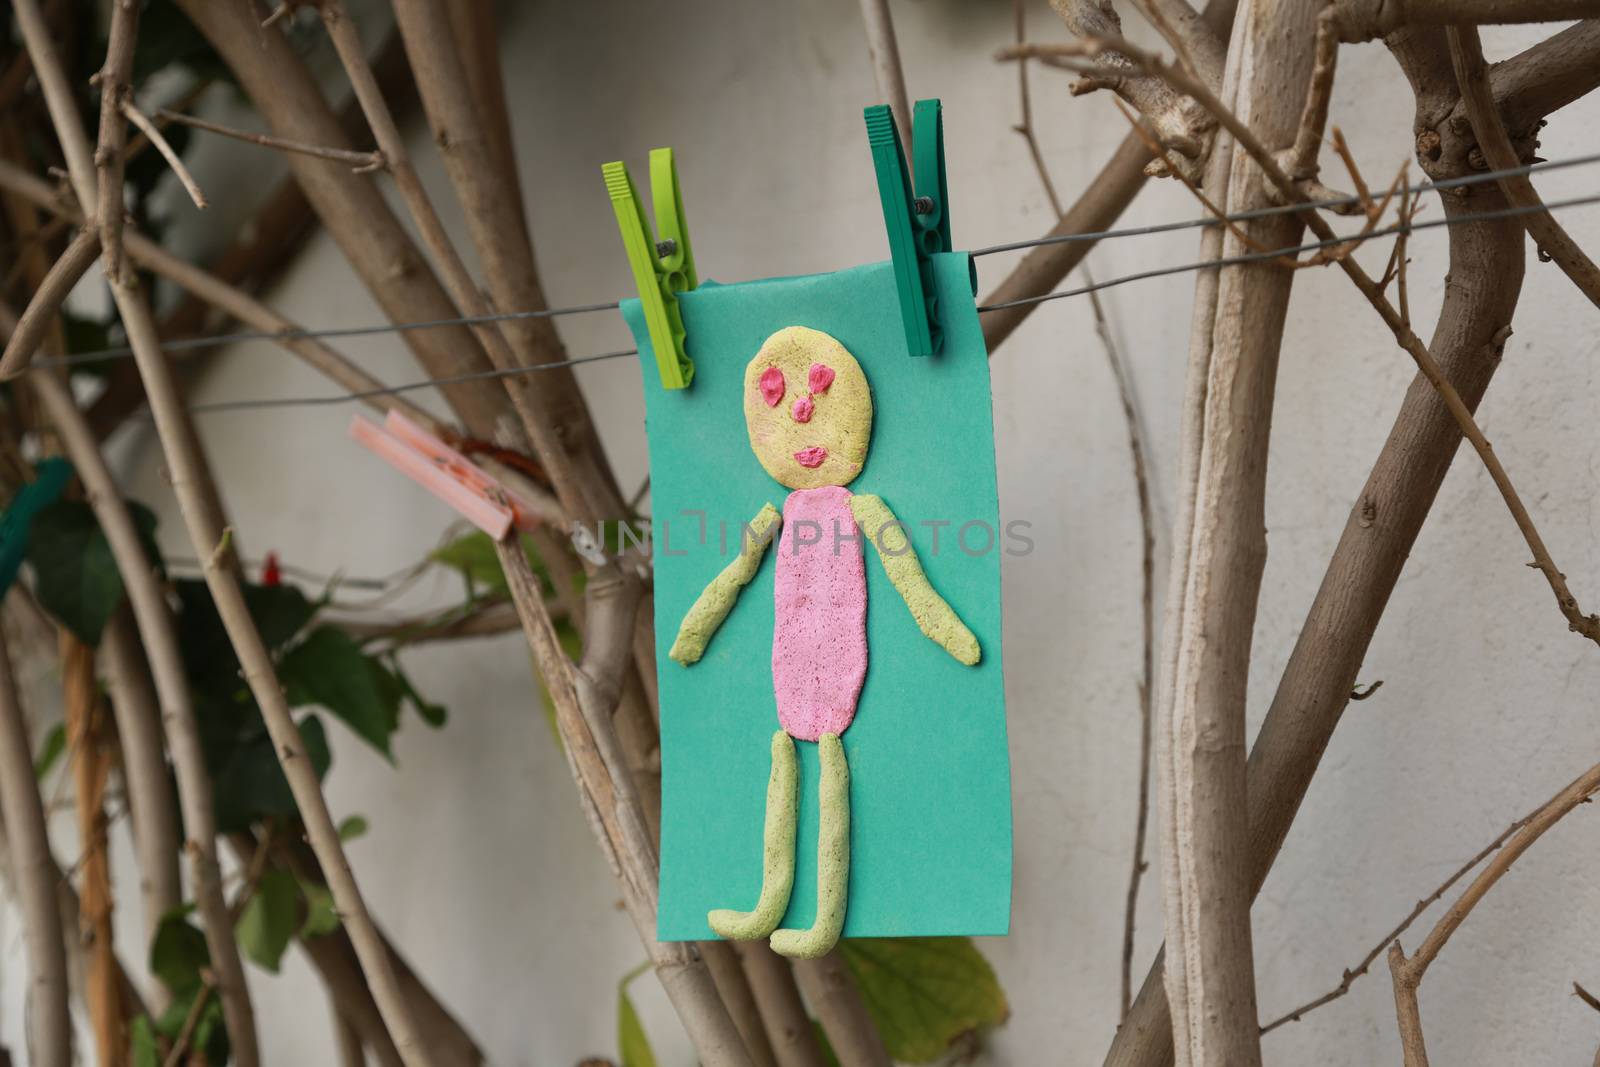 Handmade work - small man - done from the salted dough by a 4 years old child during his classes in the kindergarden.